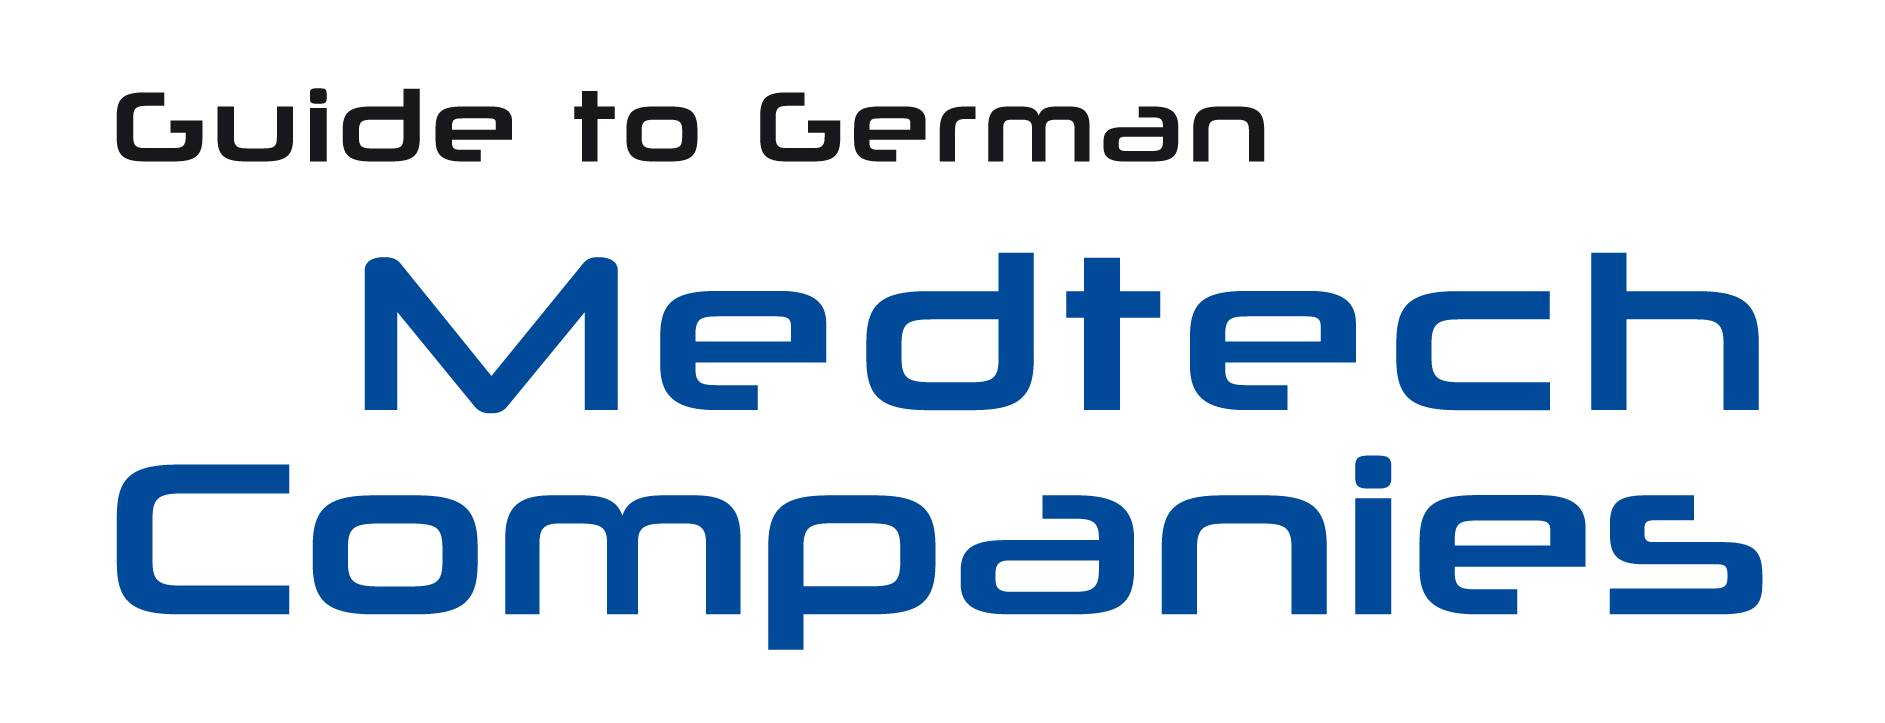 Guide-to-German-Medtech-Companies